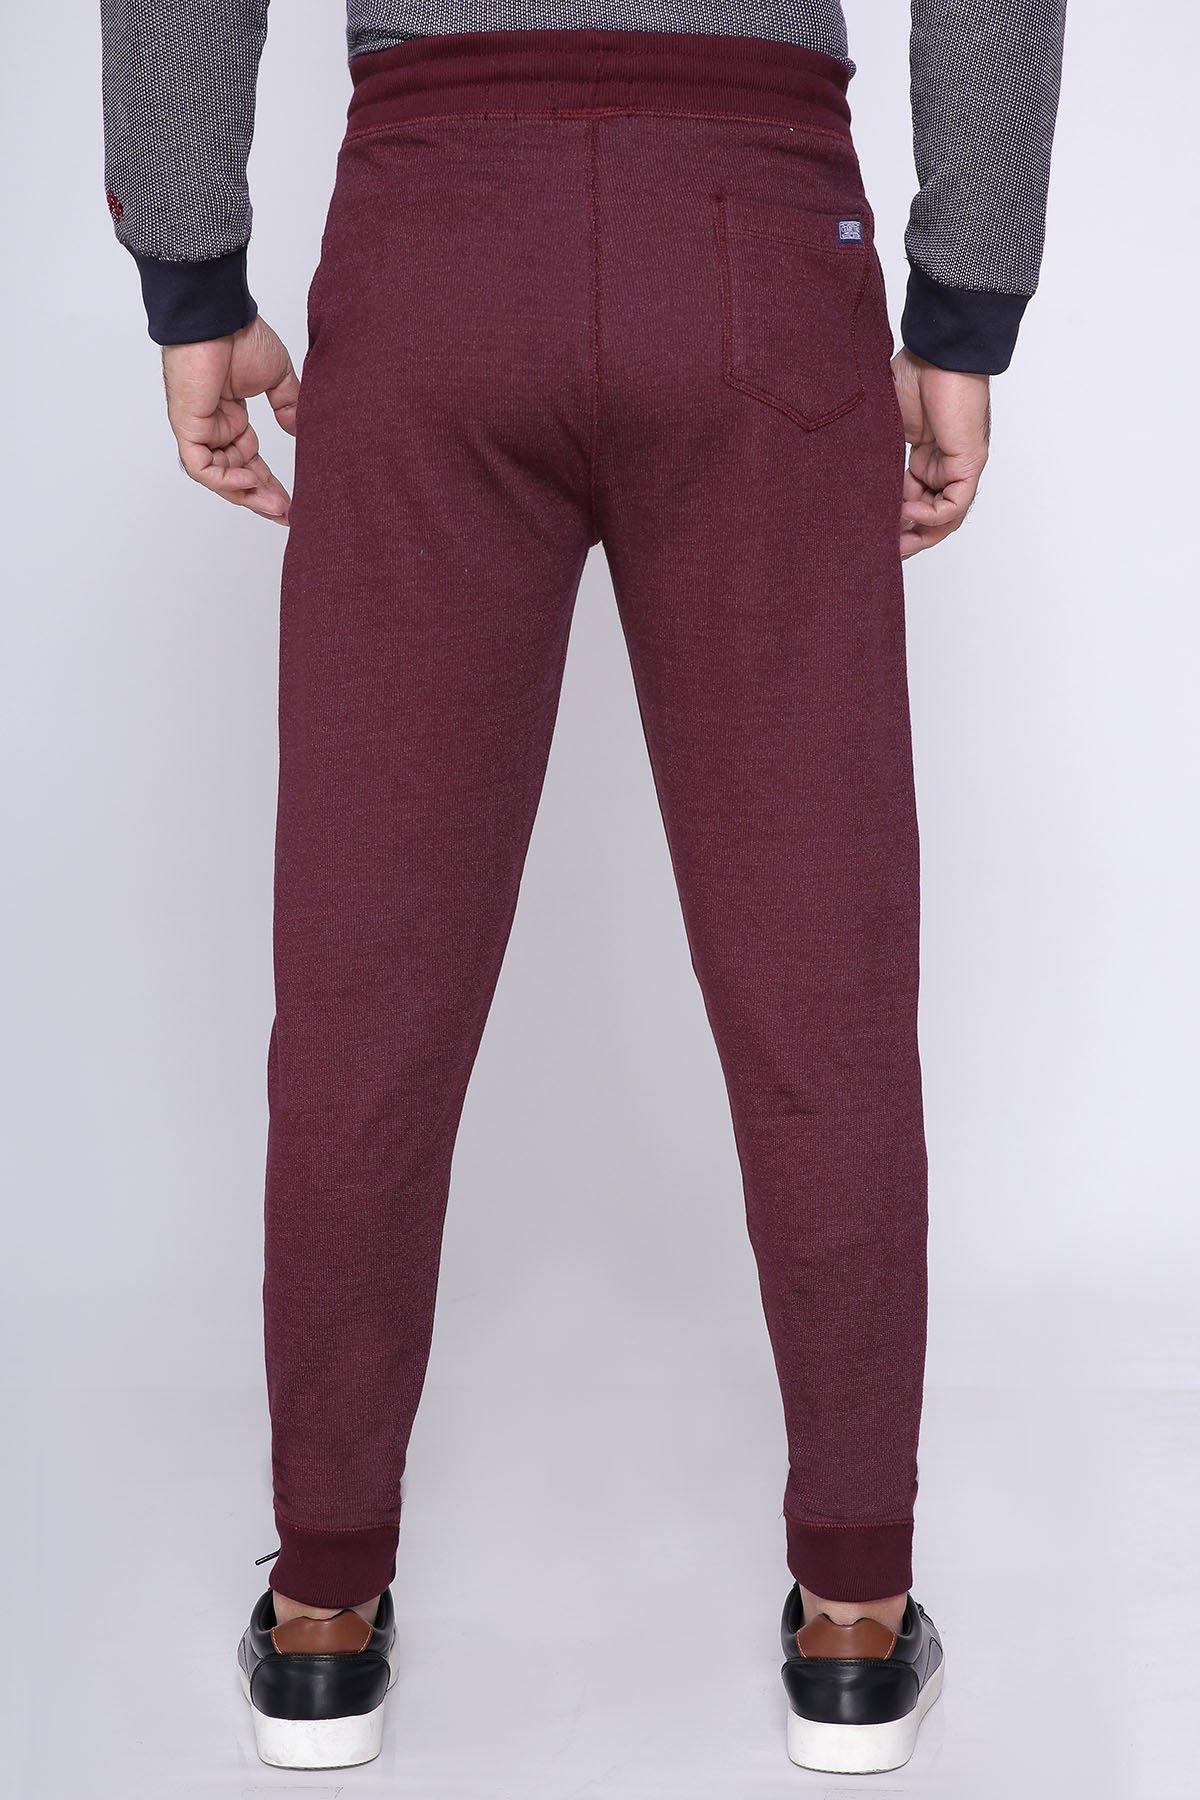 CHAIN YARN TROUSER MAROON at Charcoal Clothing